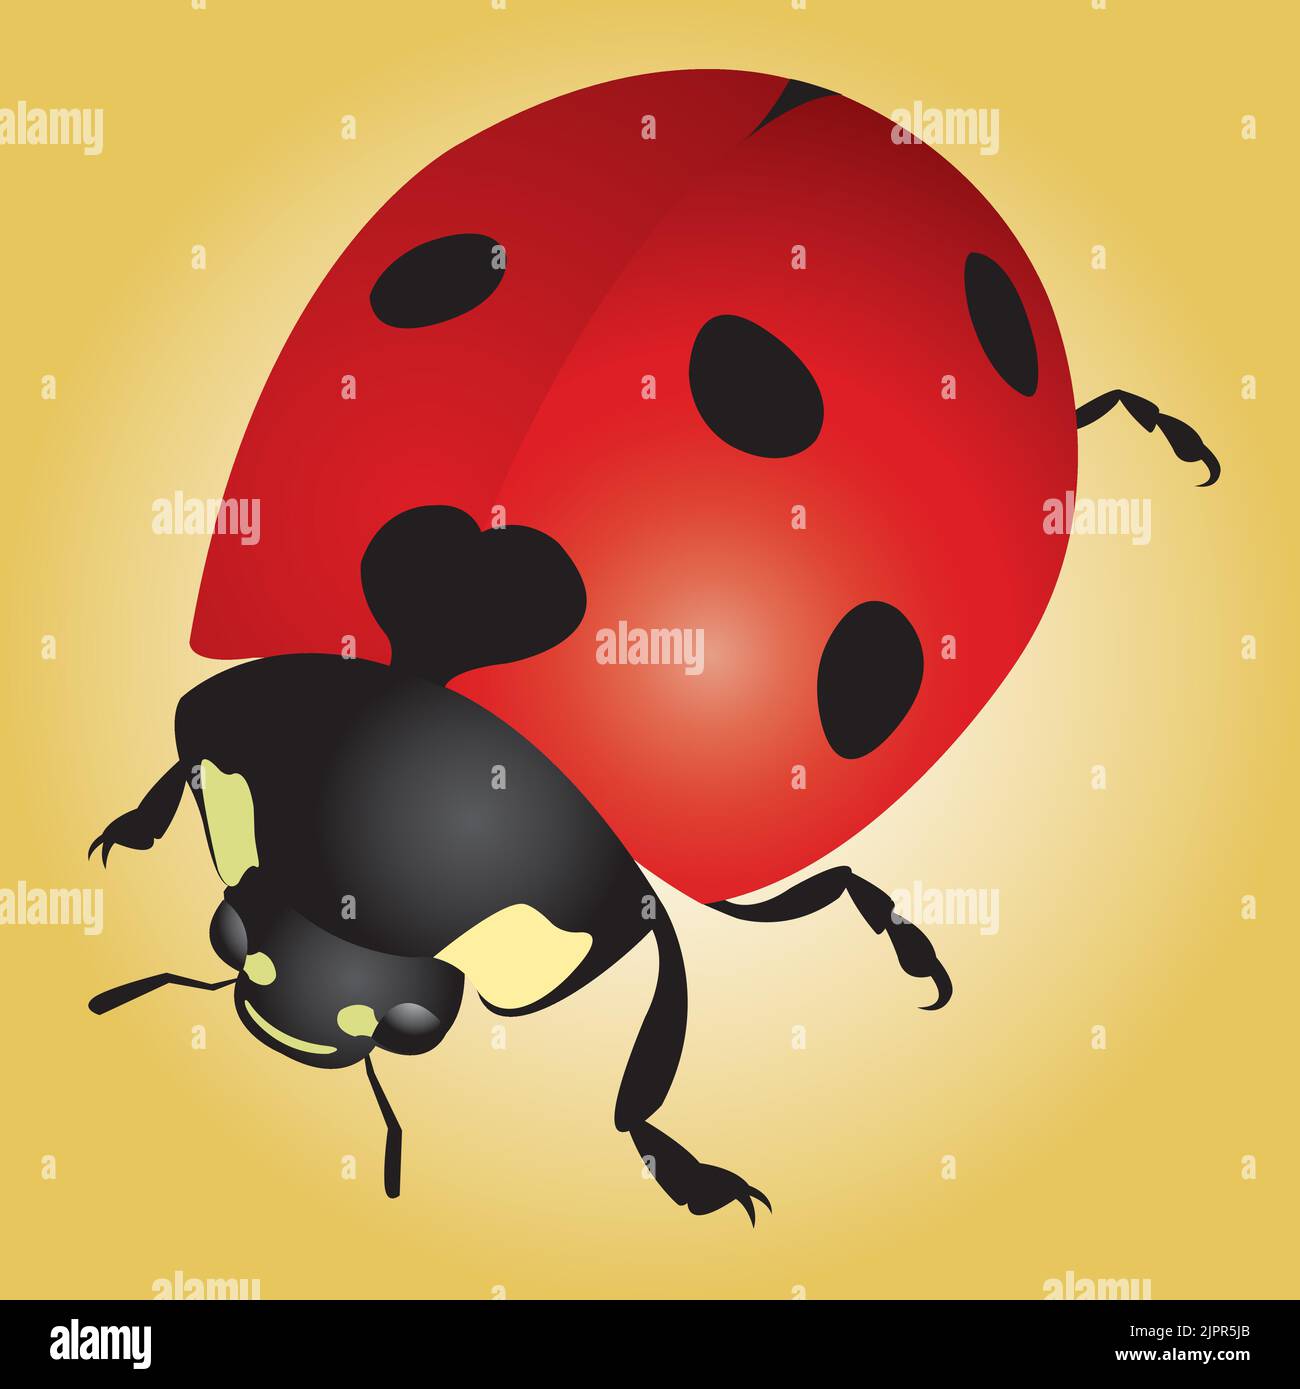 A vector graphic illustration of a red spotted ladybug. Stock Vector